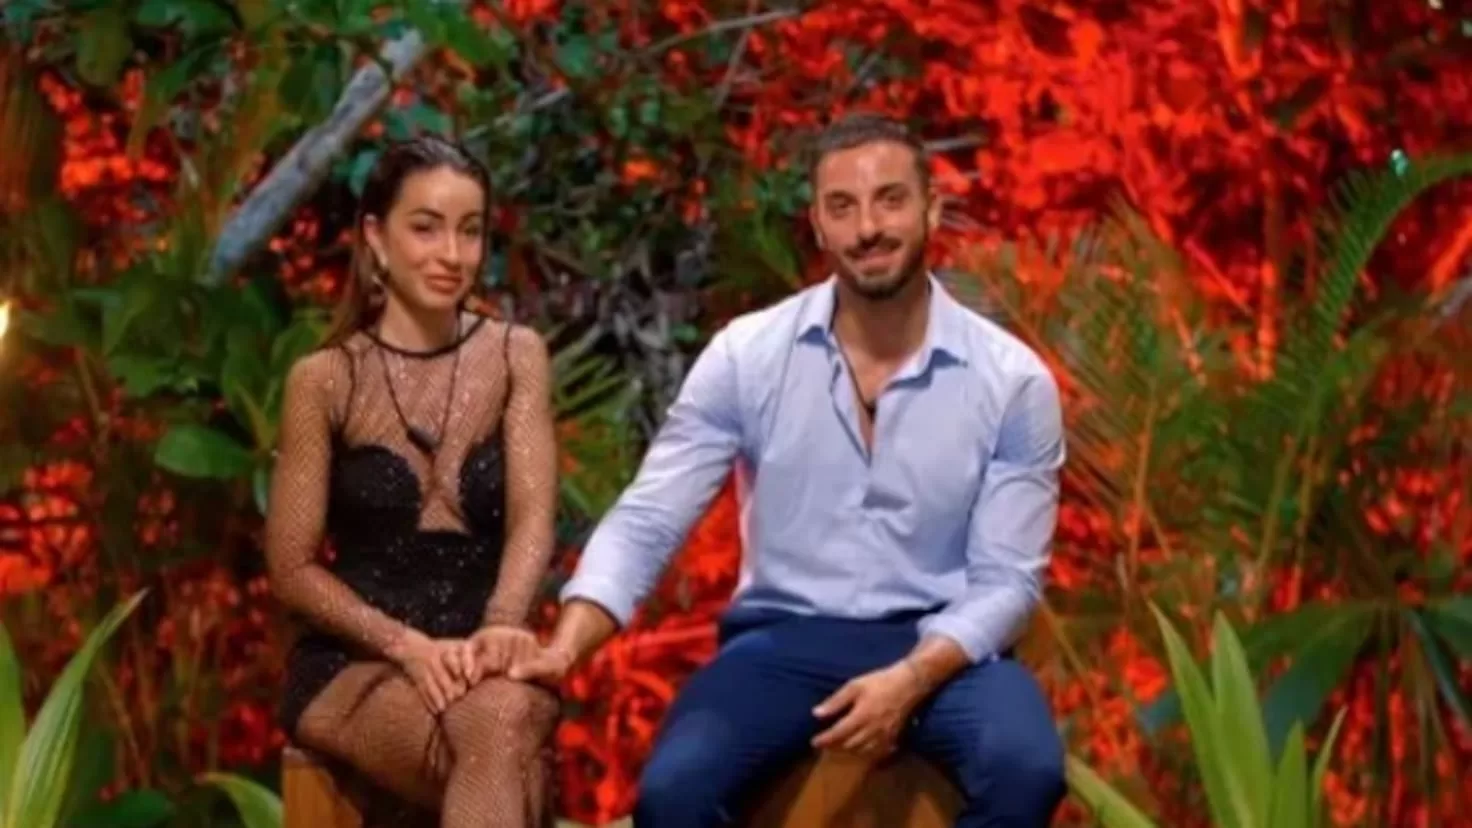 Finale of Temptation Island 7: which couples have dated and which have not
